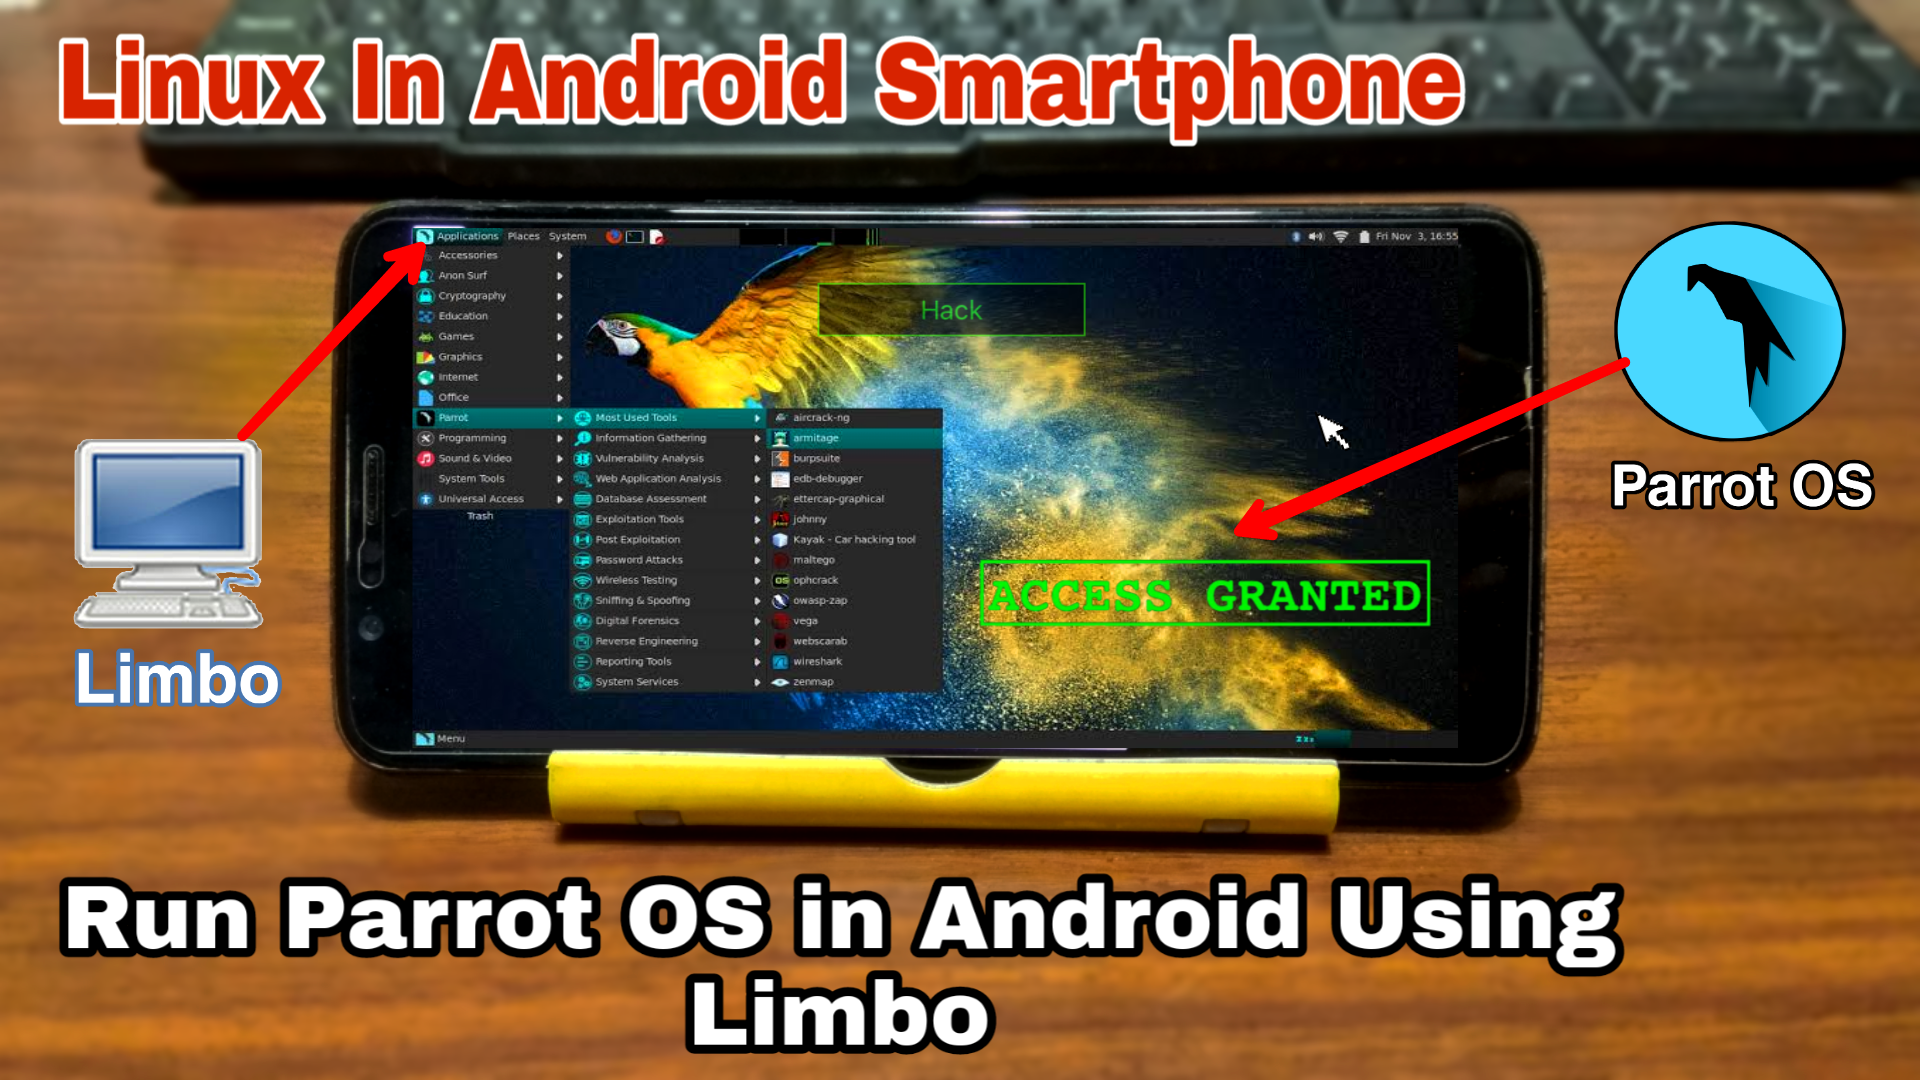 How To Run Parrot Os In Android Phone Using Limbo Pc Emulator